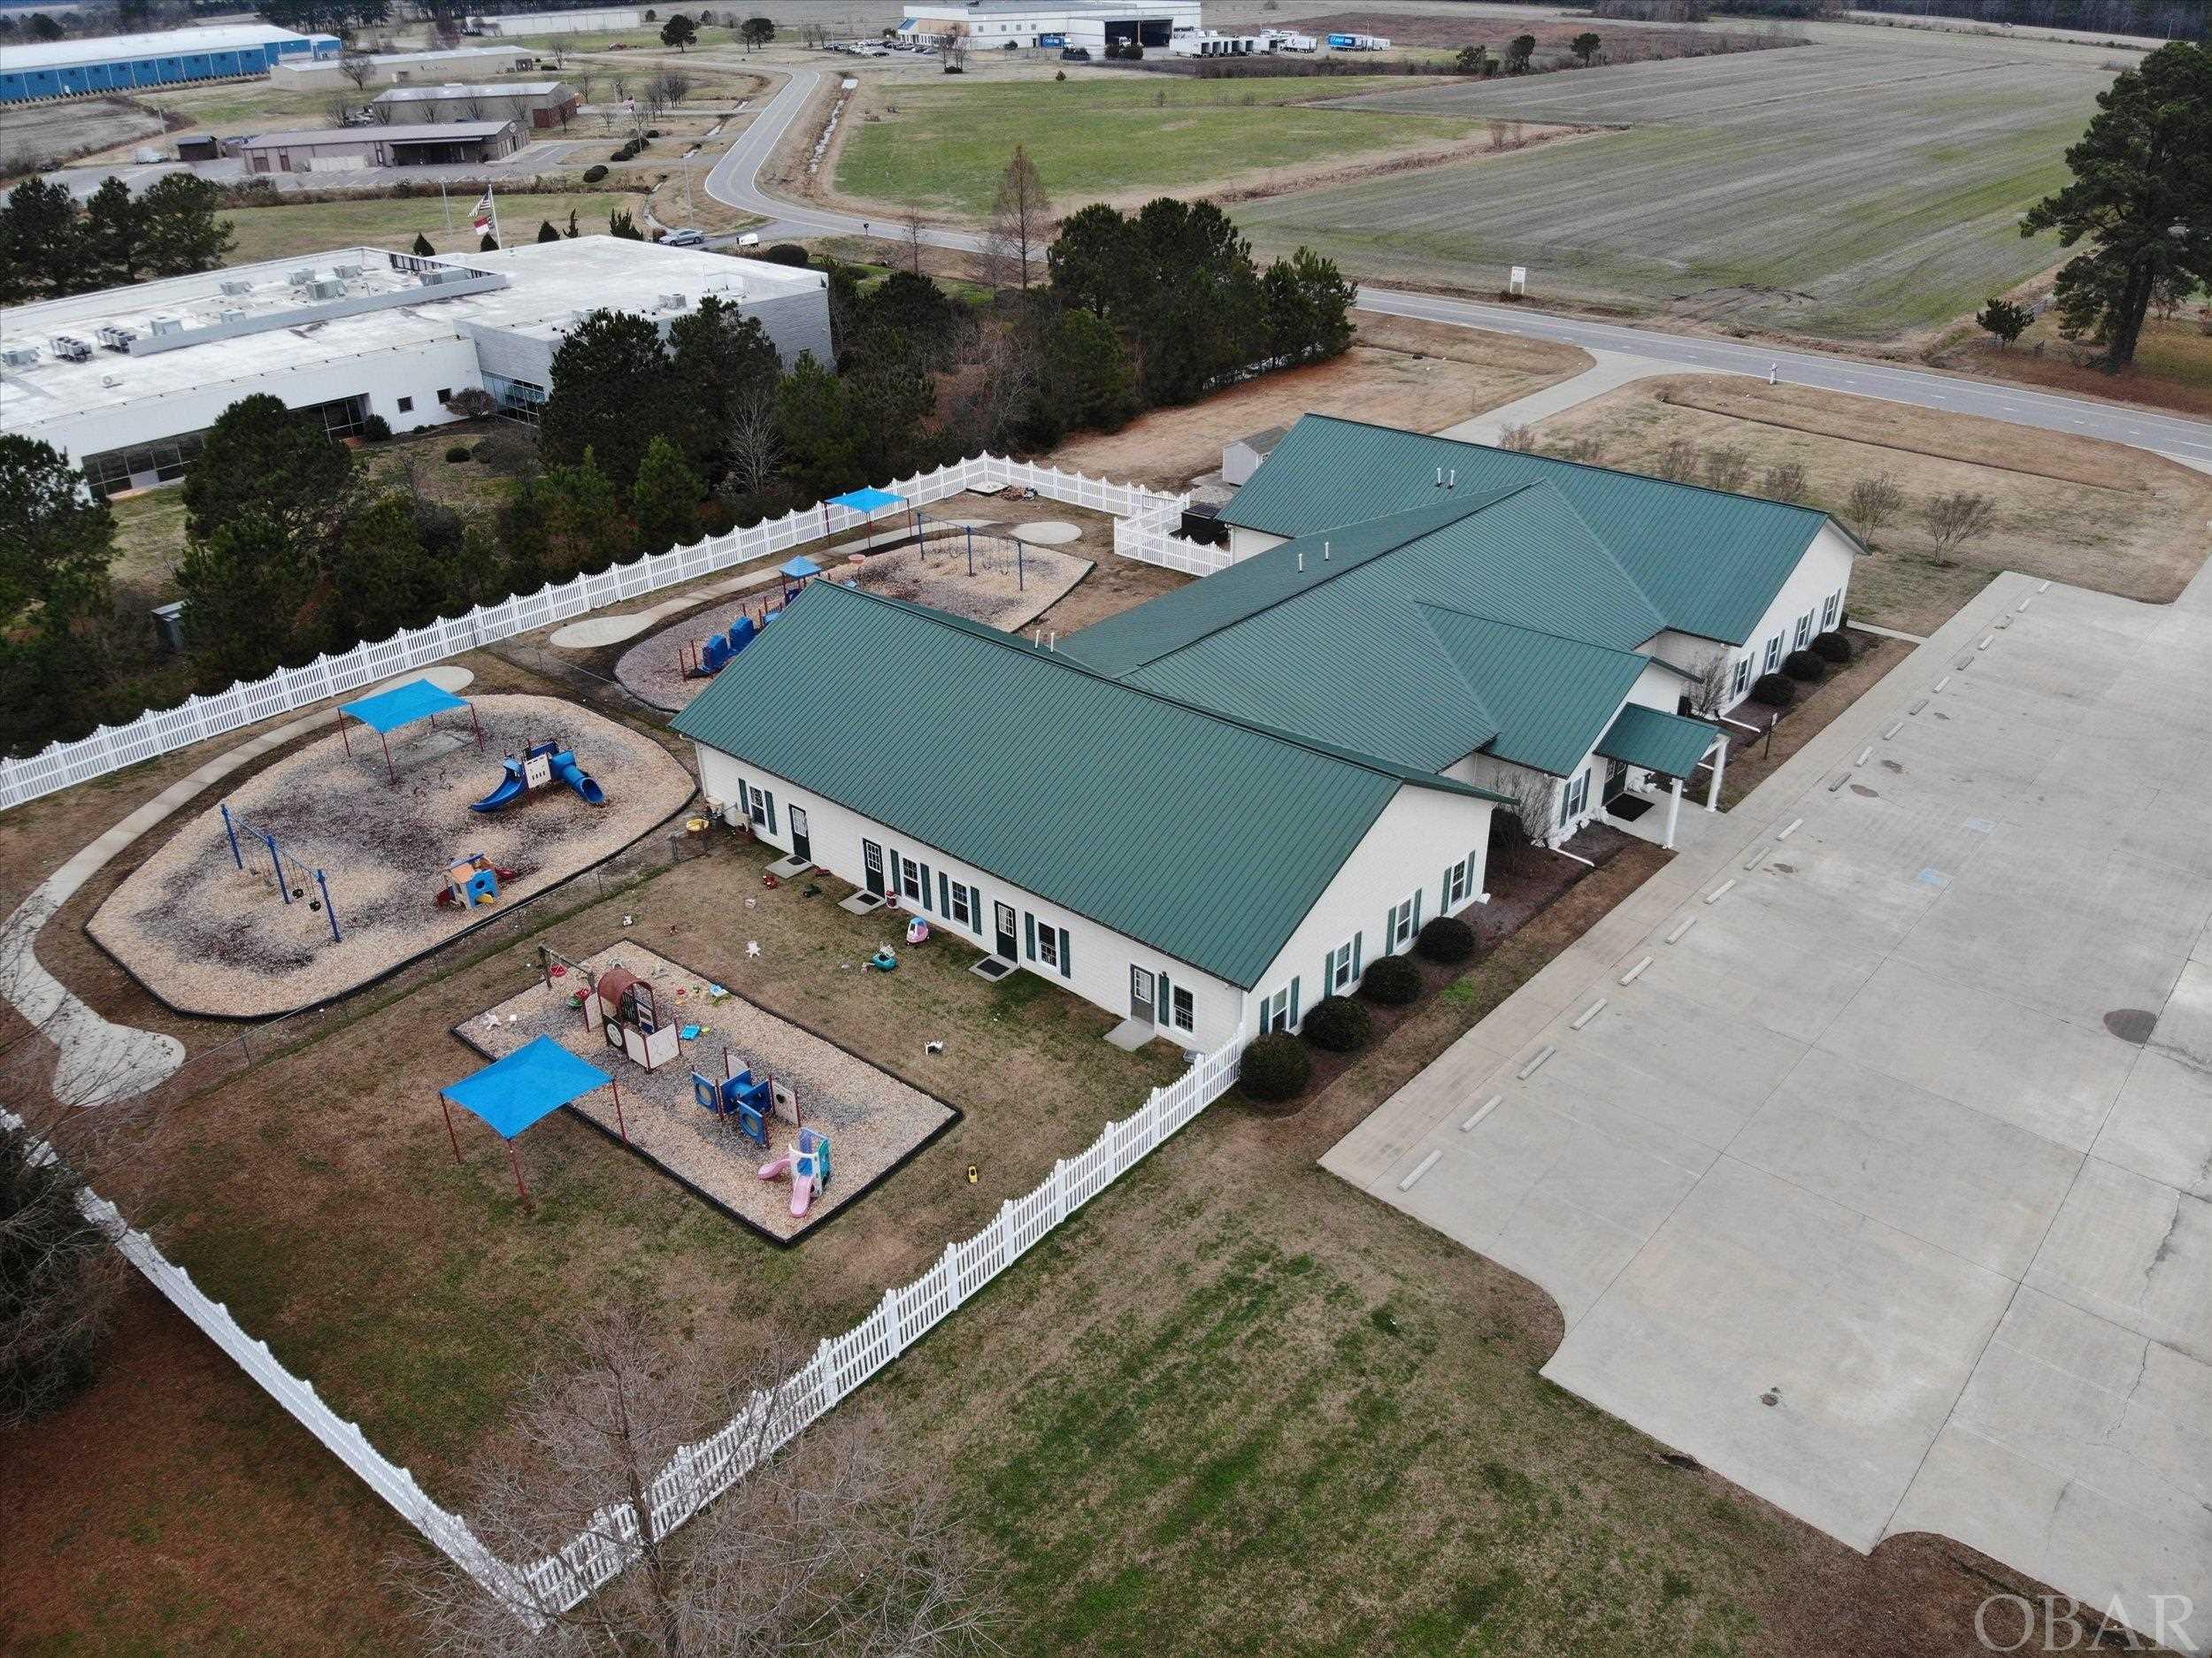 The EC community still seems to have a need for the current configuration and property use as a daycare/academy.  However, the interior has an existing commercial kitchen, several expansive open areas, and offices making a customized buildout a great economic alternative to new construction.  This 10,400 SF building is located on +/-2.7 acres in the Pasquotank Commerce Park, a 300-acre industrial business park only 32 South of the Port of VA (POV) and just off US 17 Bypass.  This is the choice location for enjoying the economic benefits of NC such as lower cost of living compared to Southeastern VA communities, lower corporate tax rates, lower property tax rates, and the charm of the historic downtown River City with breweries, wine bar and fantastic restaurants and shops.  Natural Gas is connected expanding other business use possibilities.  Don't miss this great investment and business opportunity!